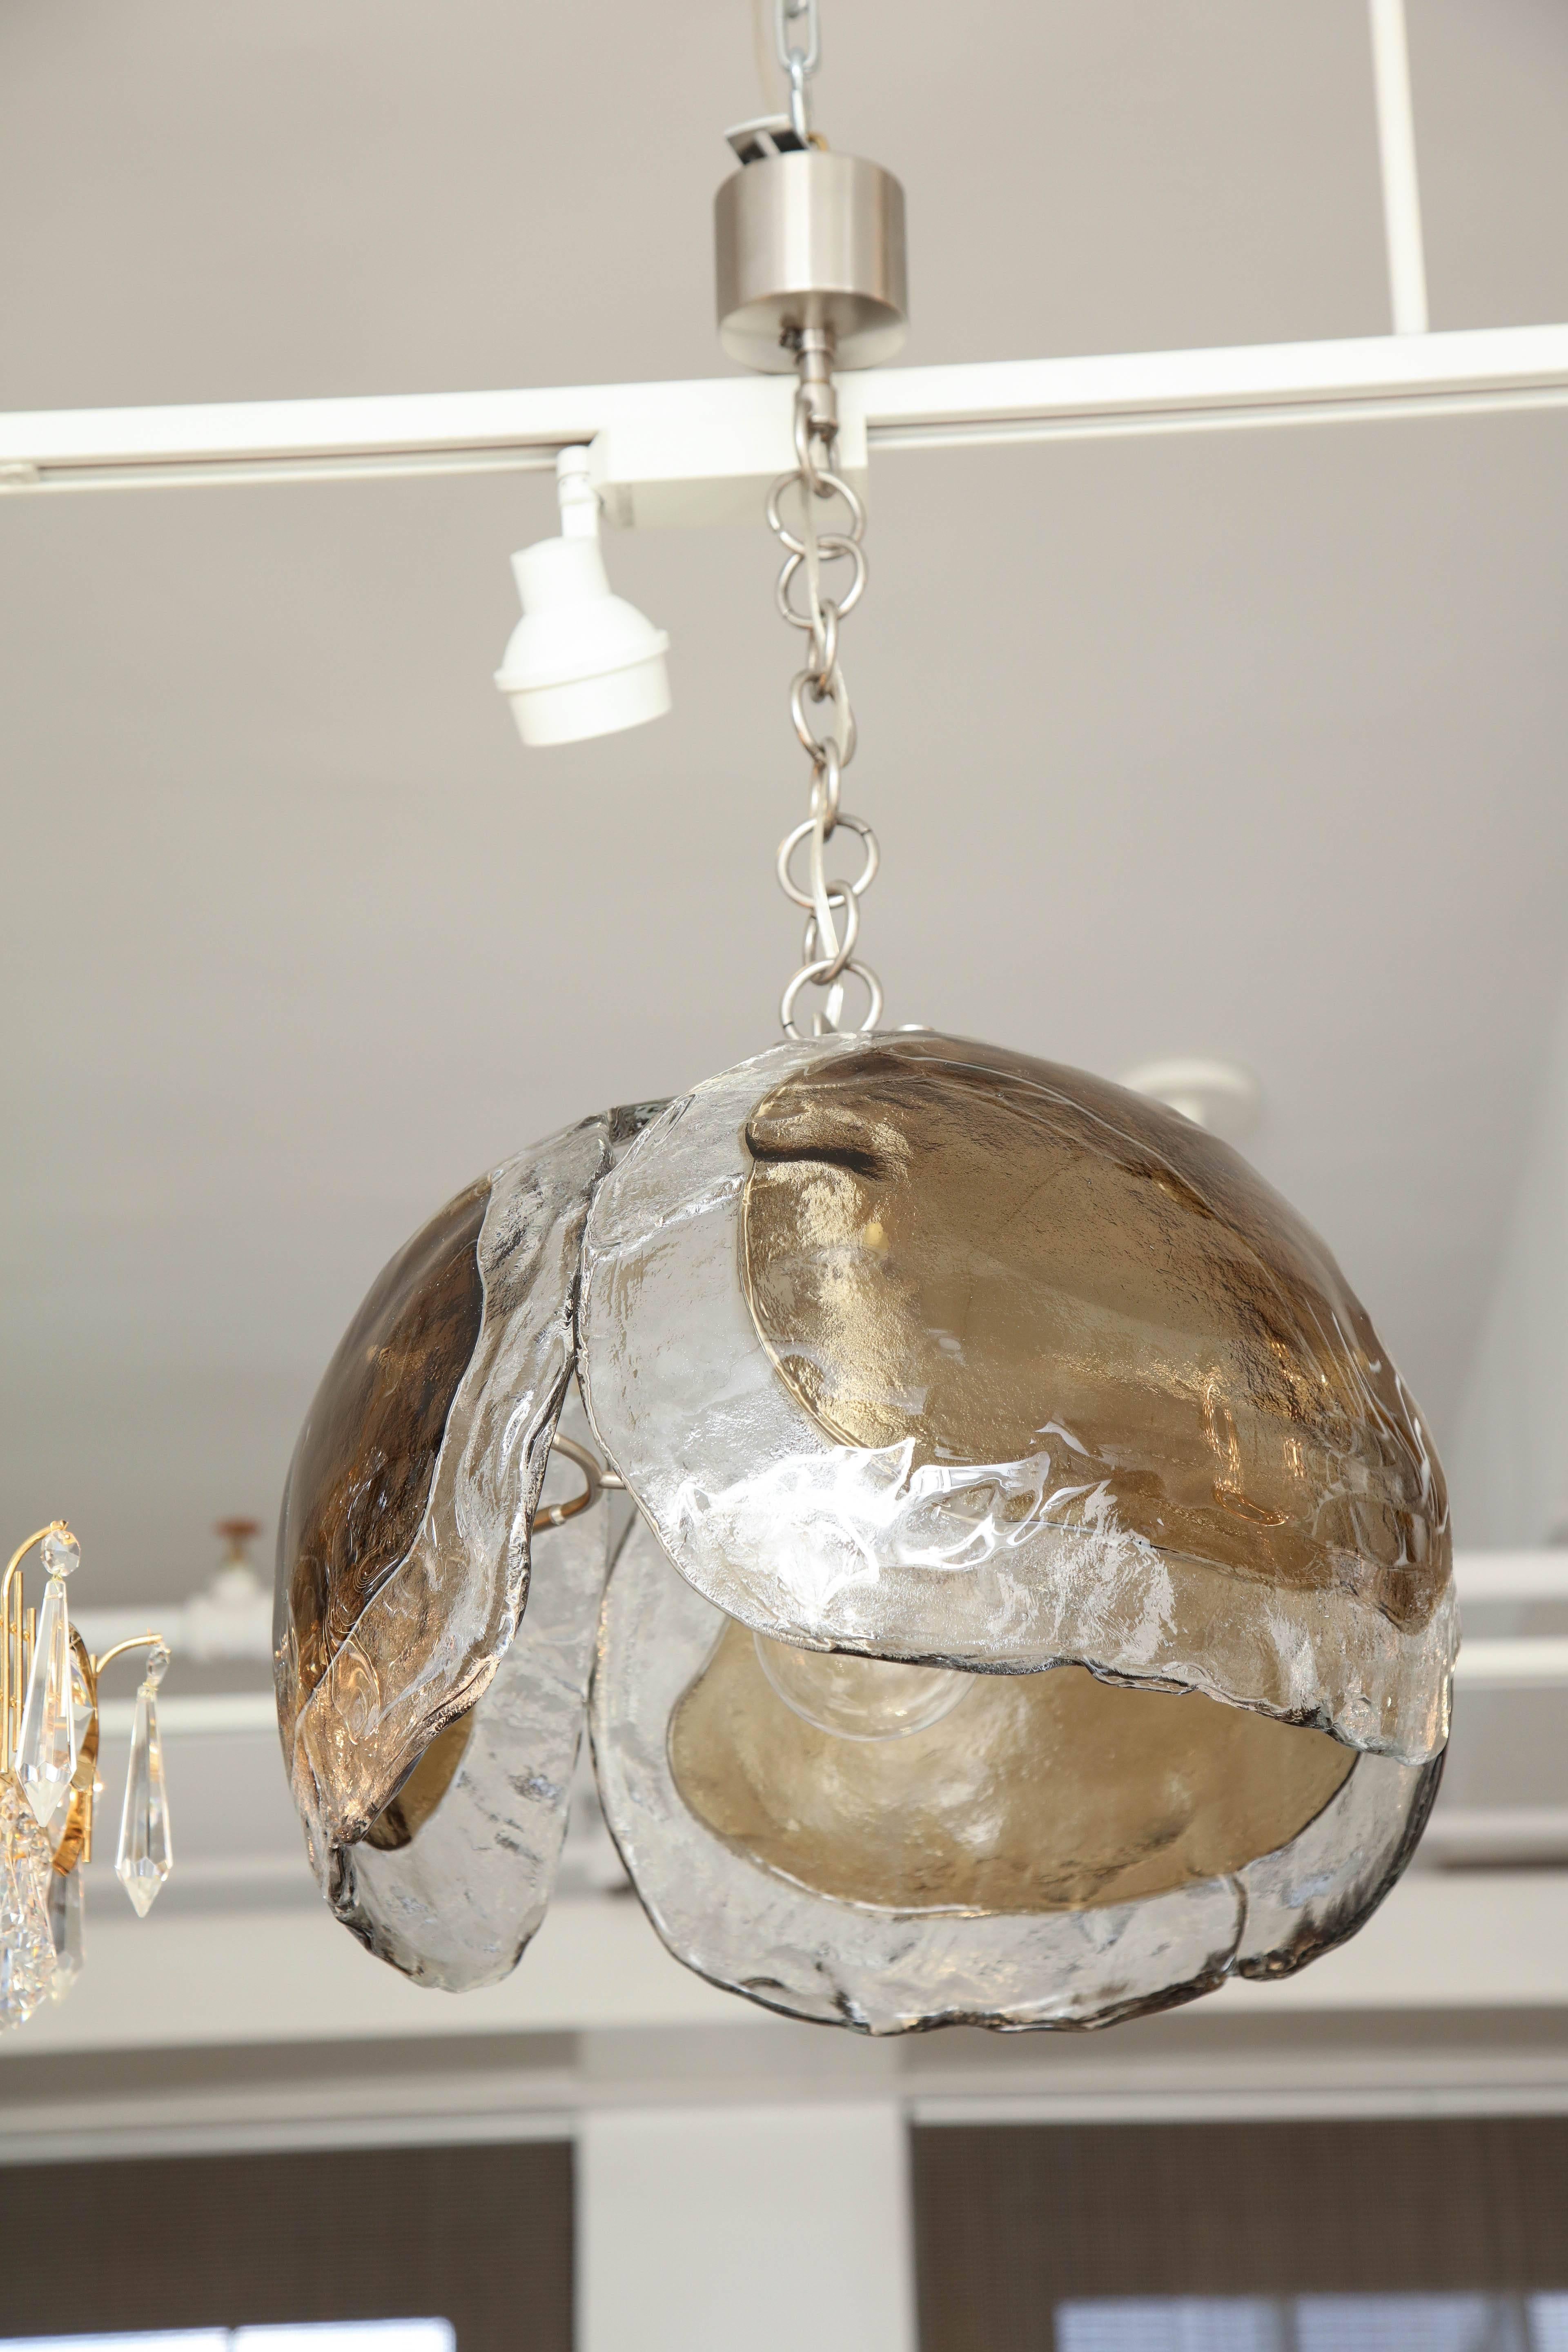 Mid-Century light pendant with clear and smoky topaz glass elements suspended on a satin nickel O ring chain and canopy. Rewired for use in USA, uses one Edison type bulb.

Glass portion measures 14